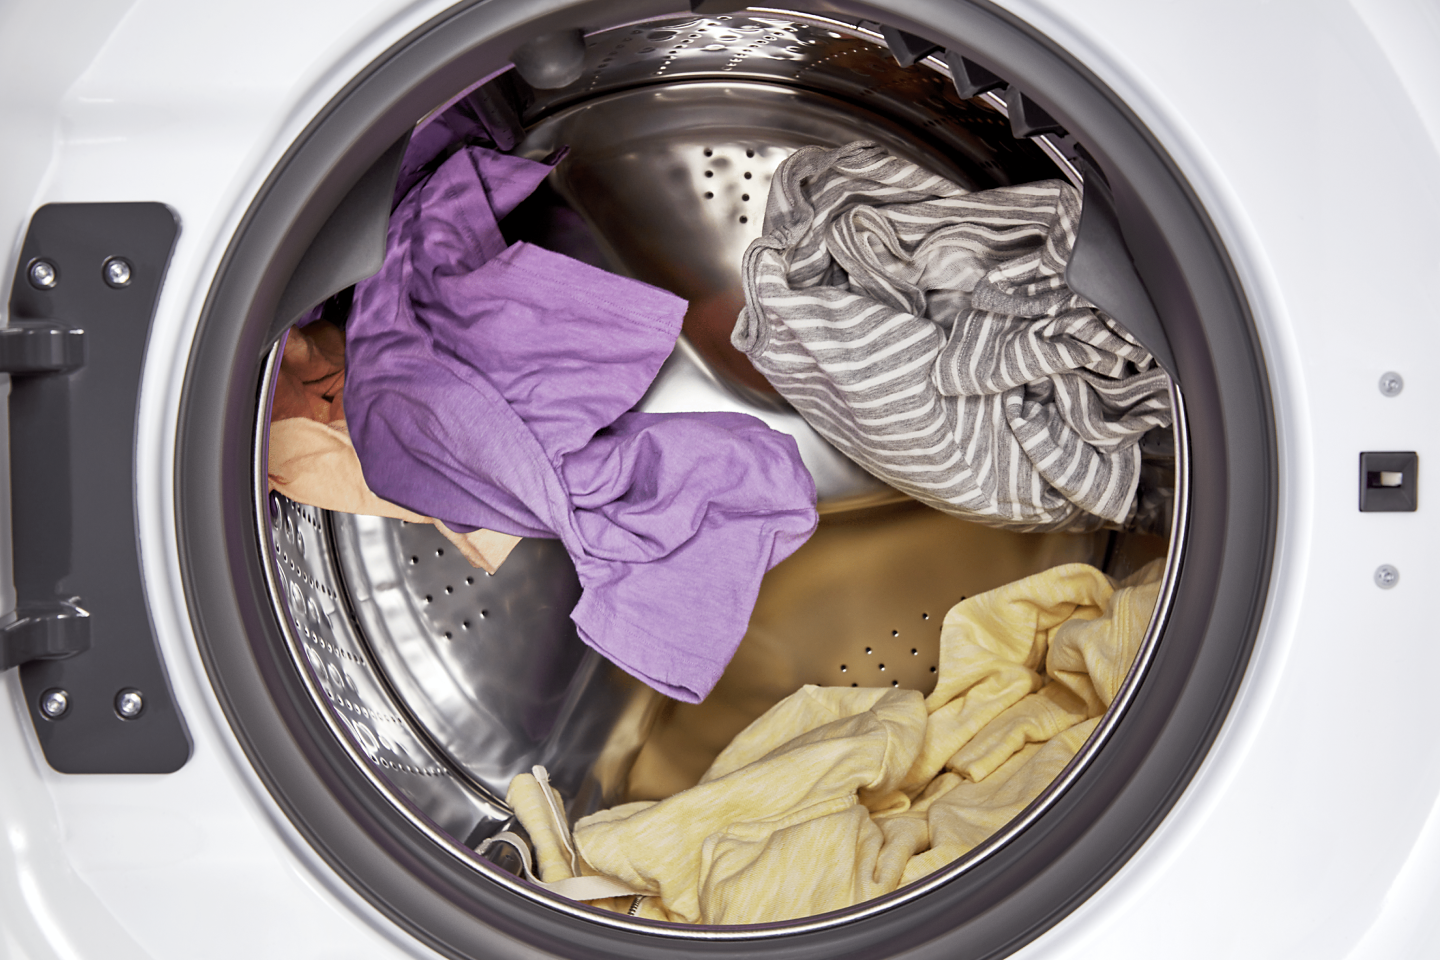 Interior shot of clothes tumbling in a dryer drum.